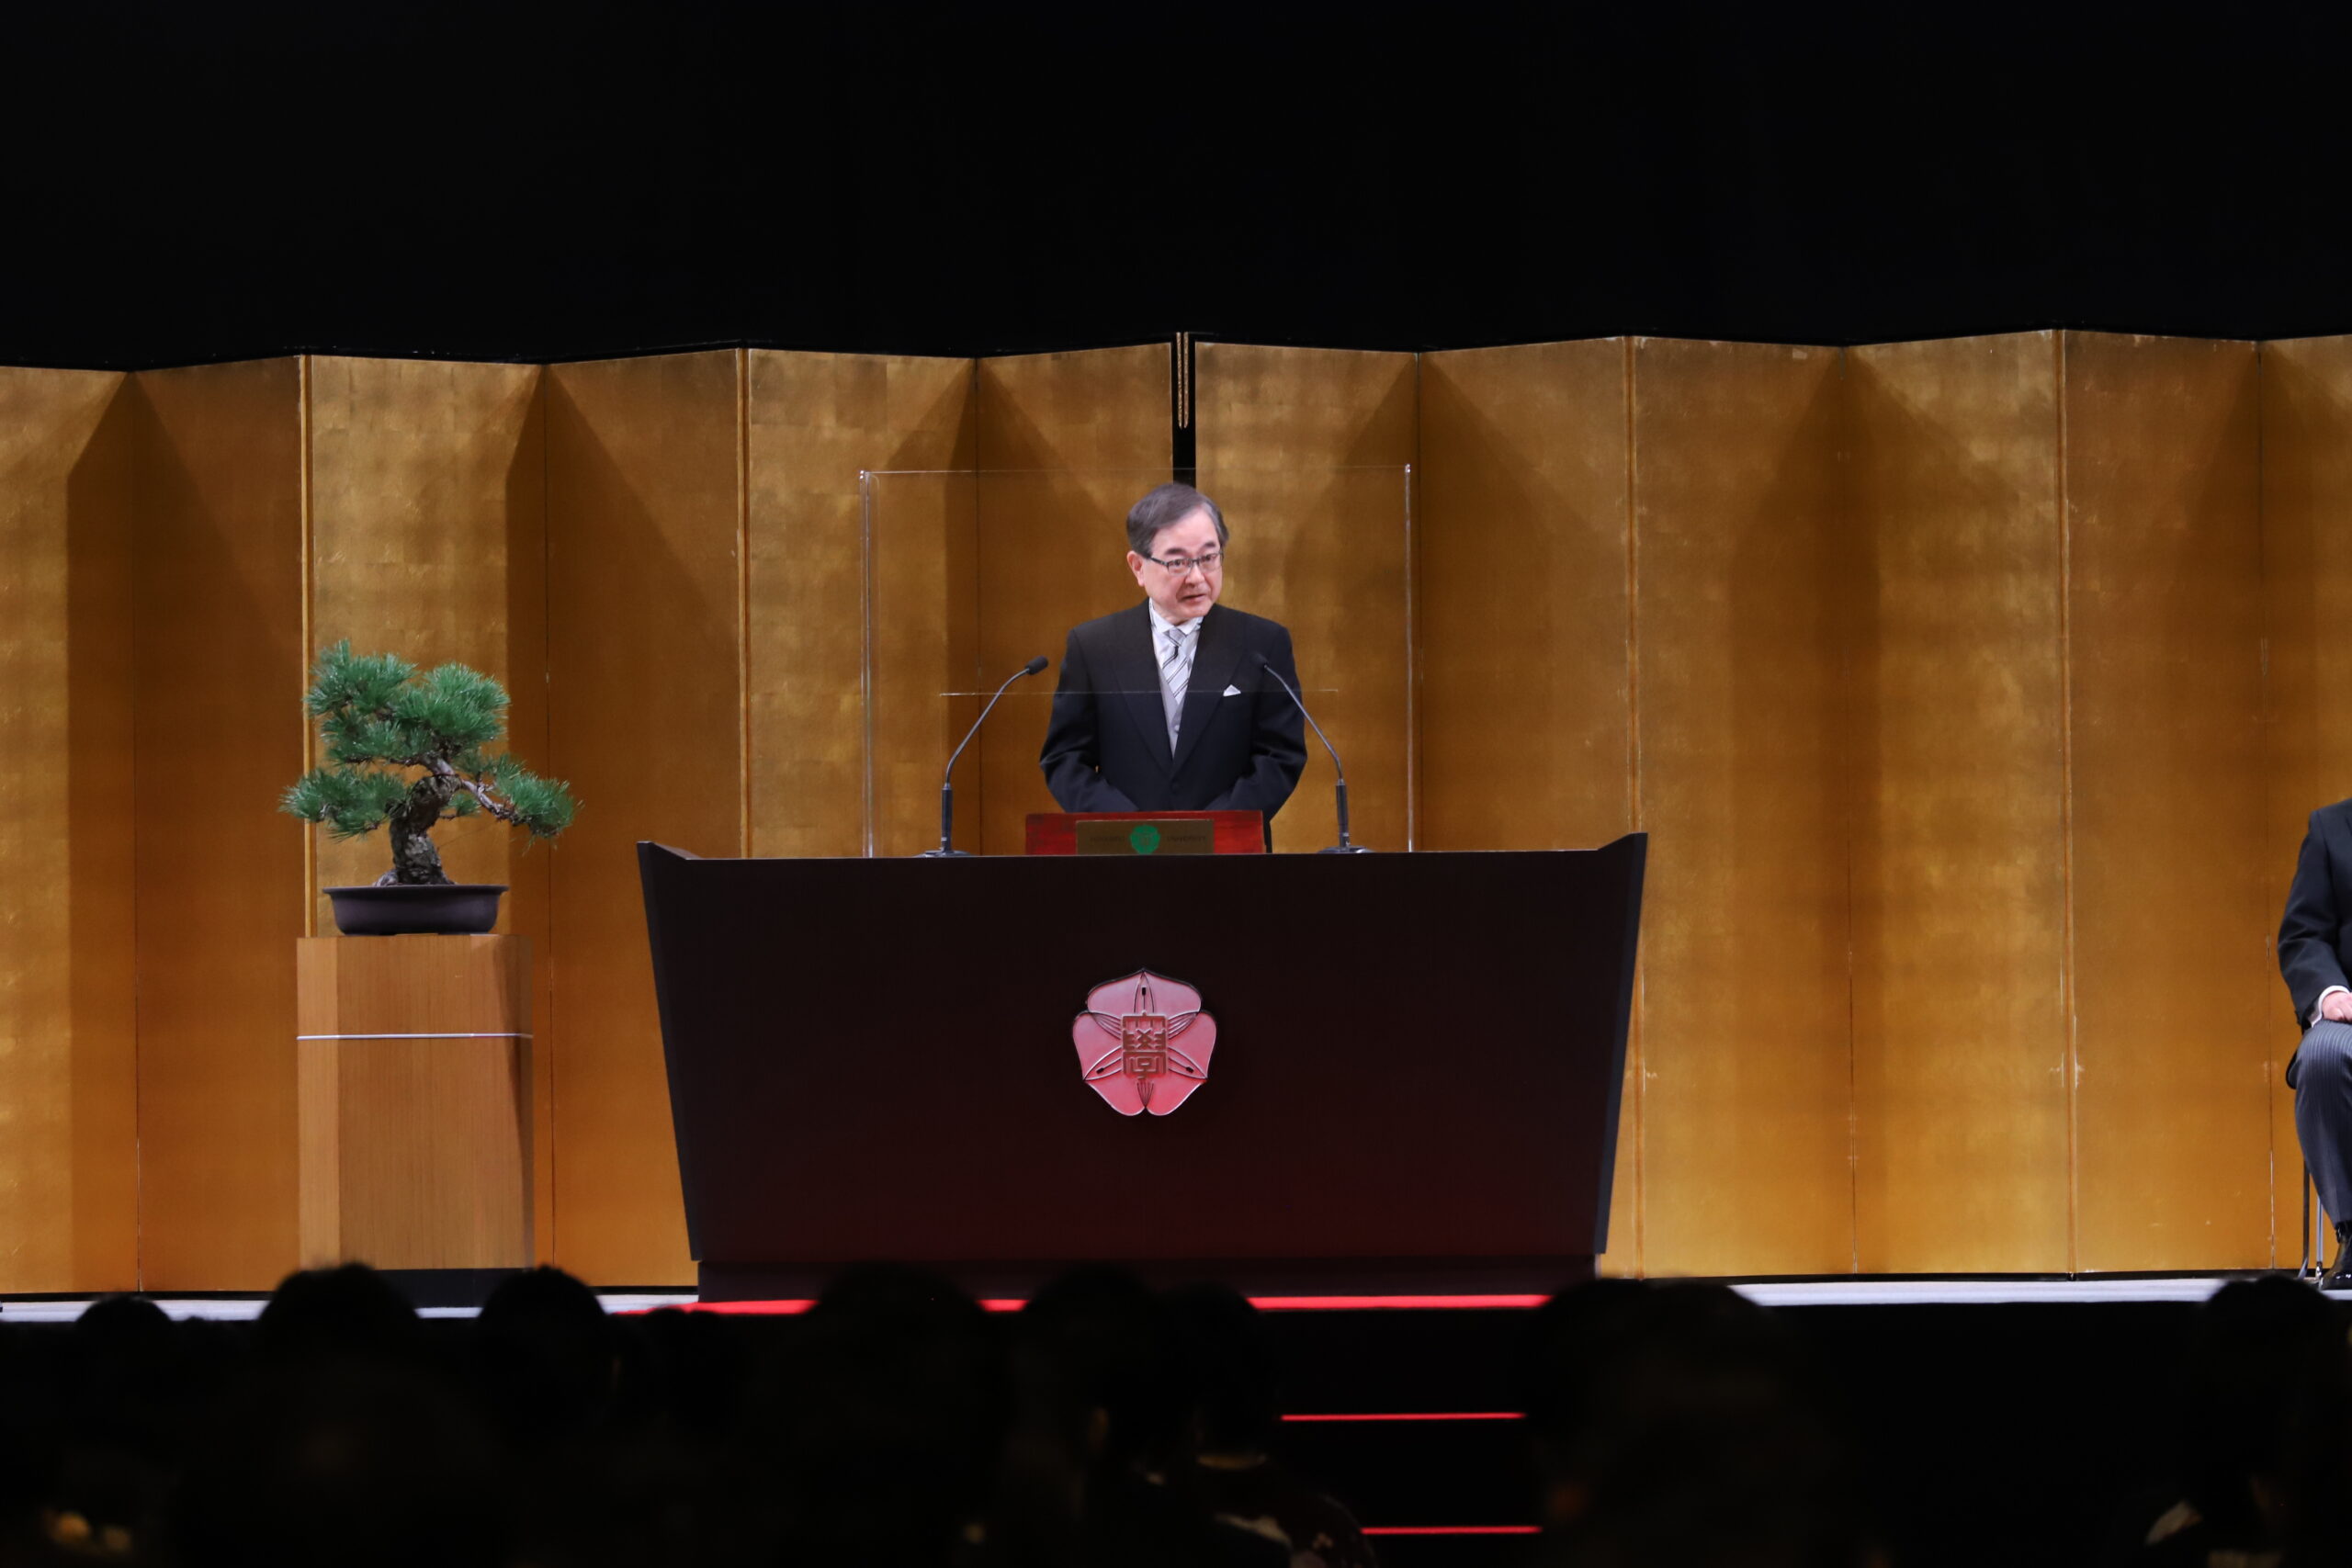 President Houkin on the podium delivering his farewell address